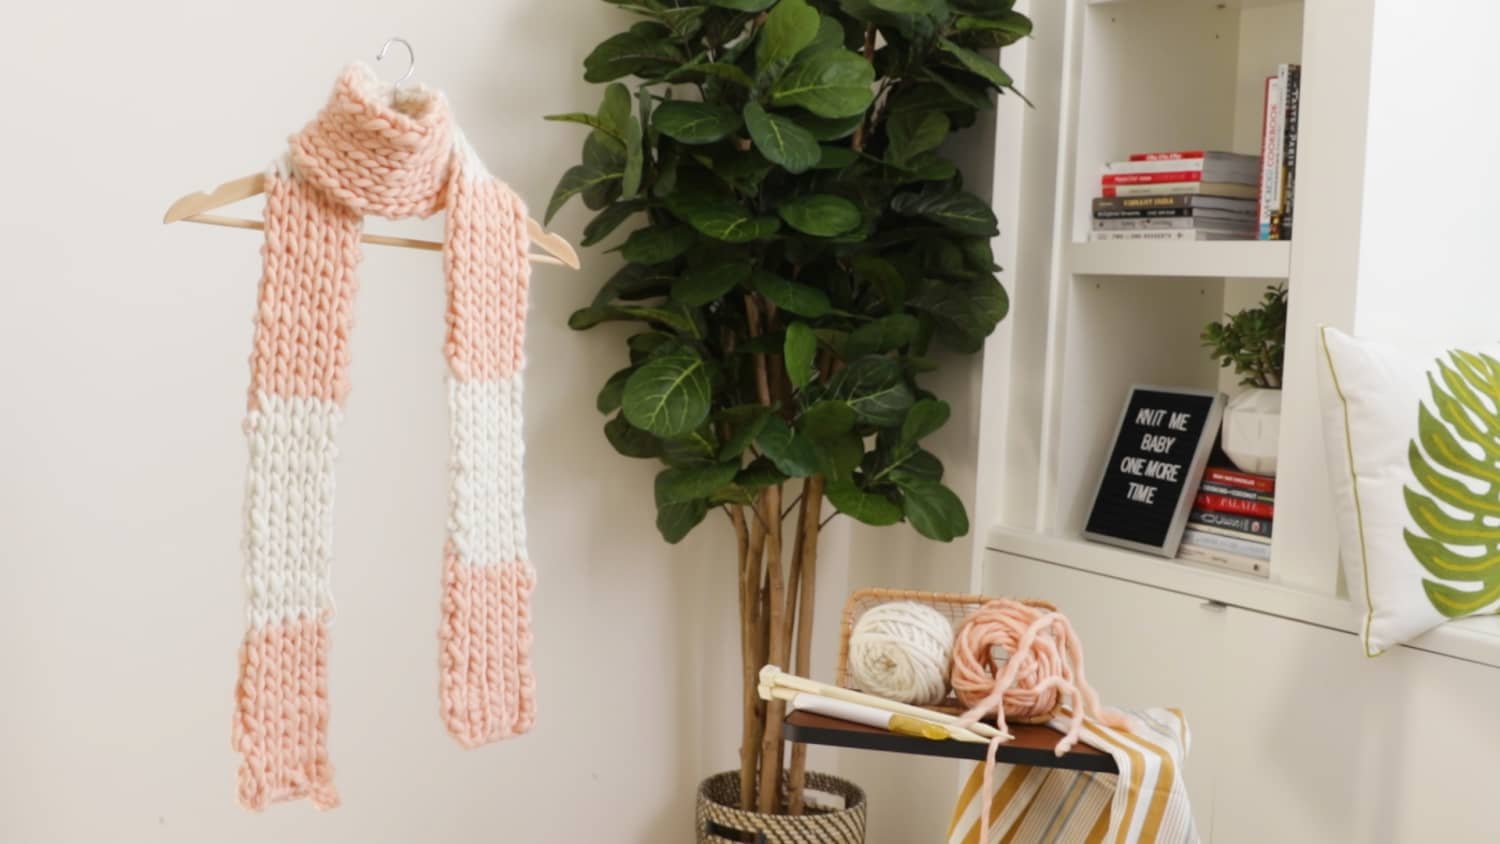 Ever Wanted to Learn to Knit? We’ll Show You How It’s Done